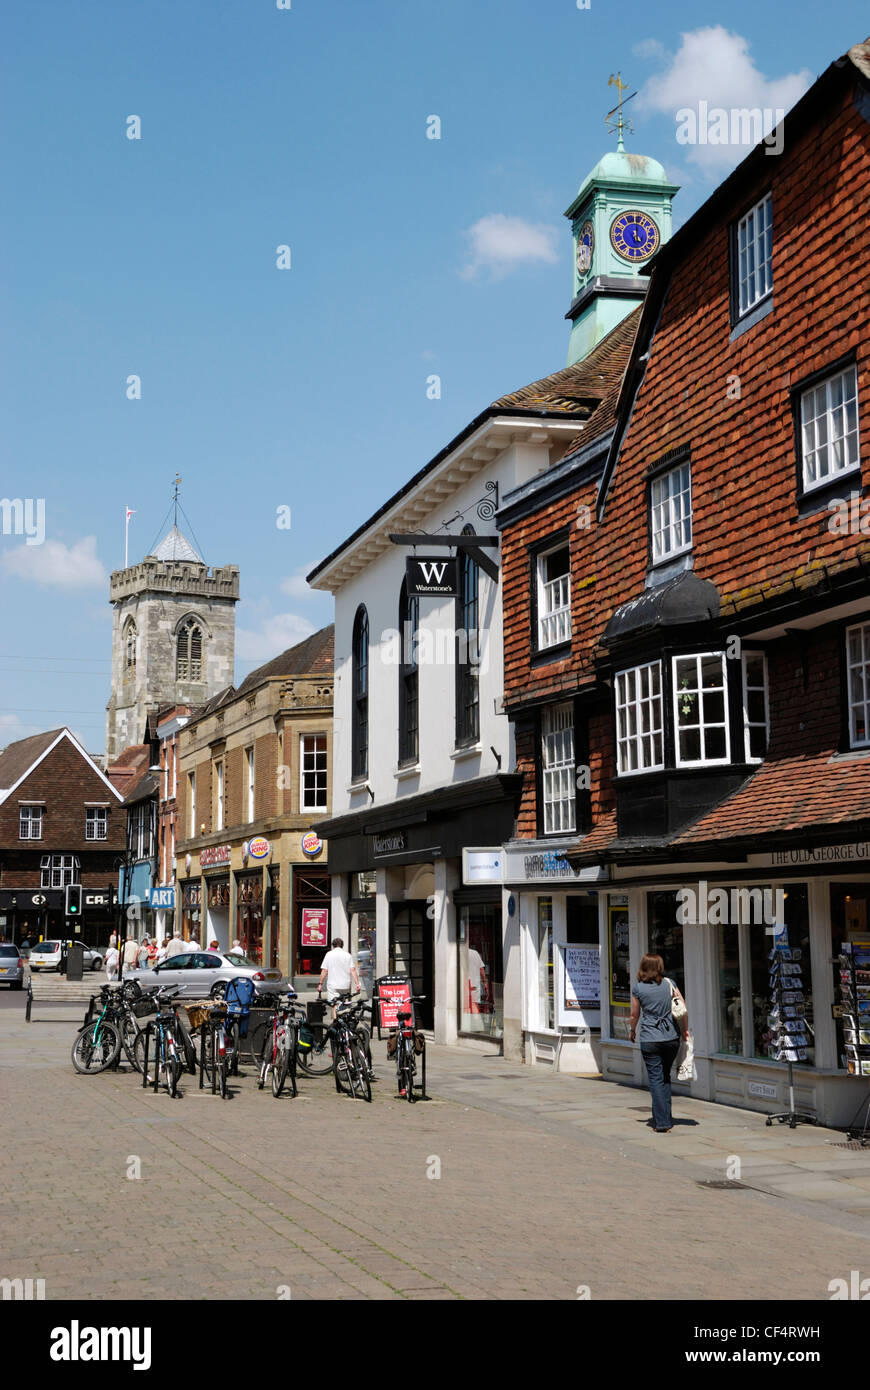 Bicycles chained to bike stands in the pedestrianised high street in Salisbury. Stock Photo